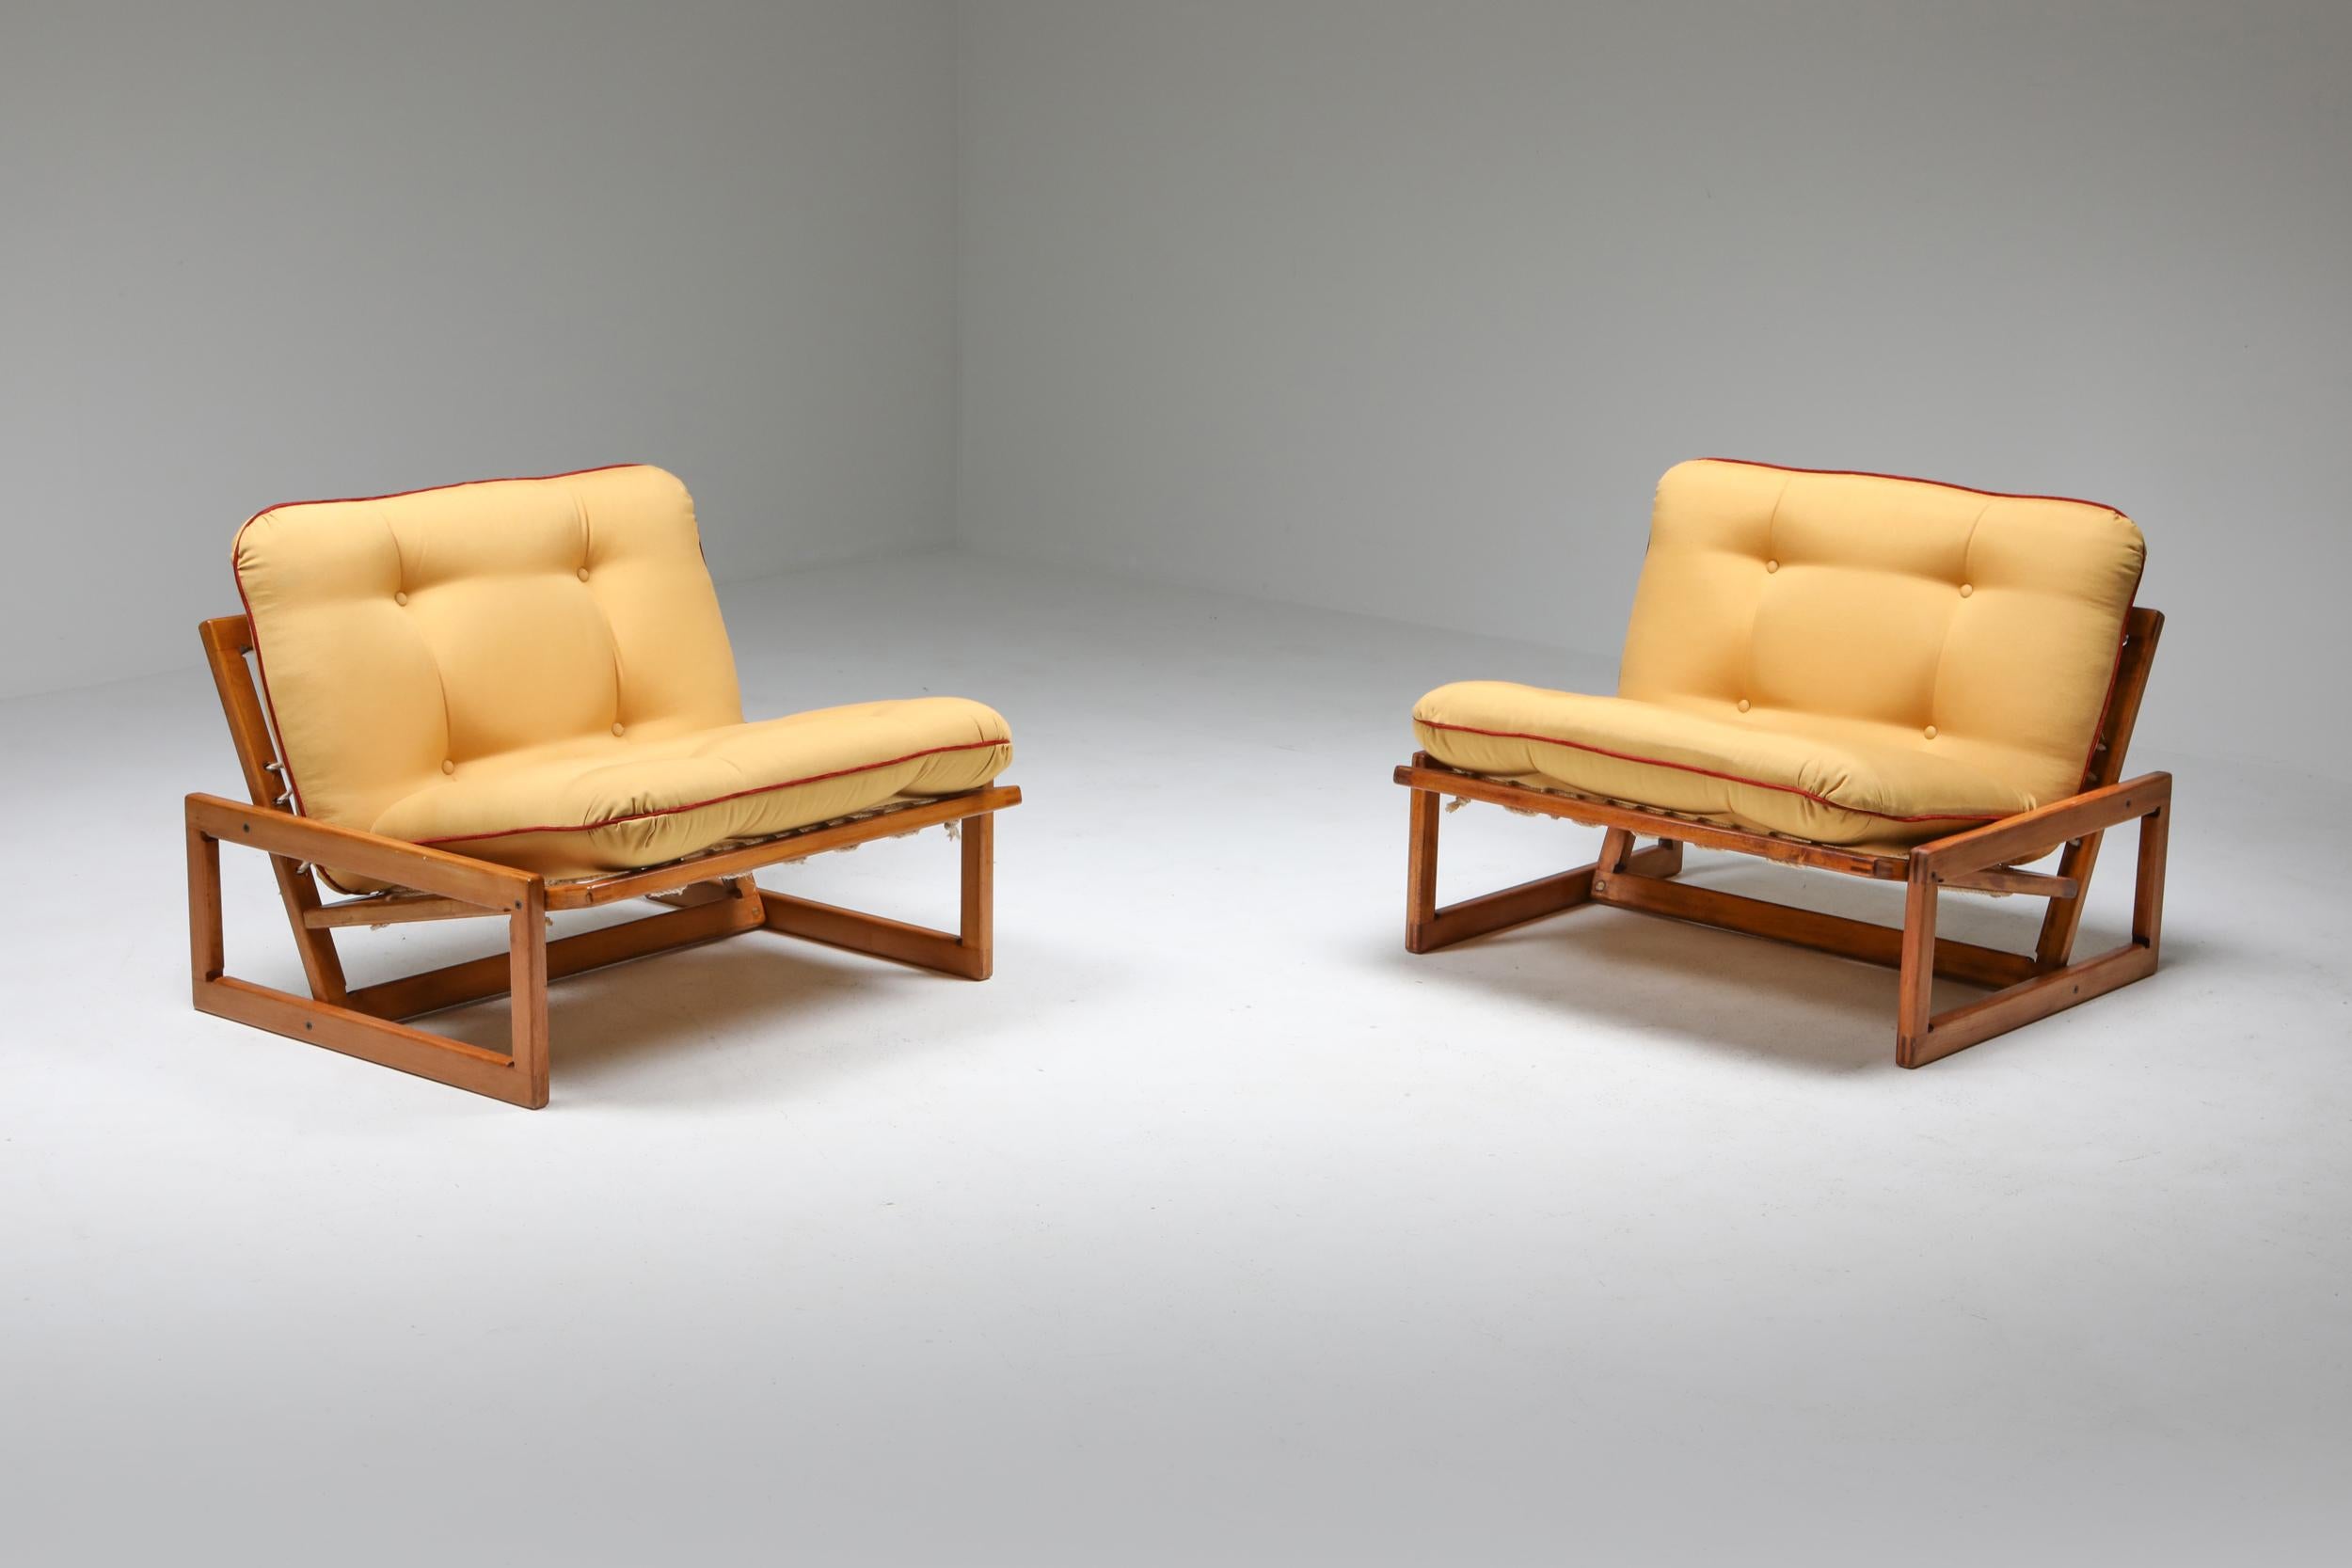 Beech Cassina 'Carlotta' Lounge Chairs by Afra and Tobia Scarpa